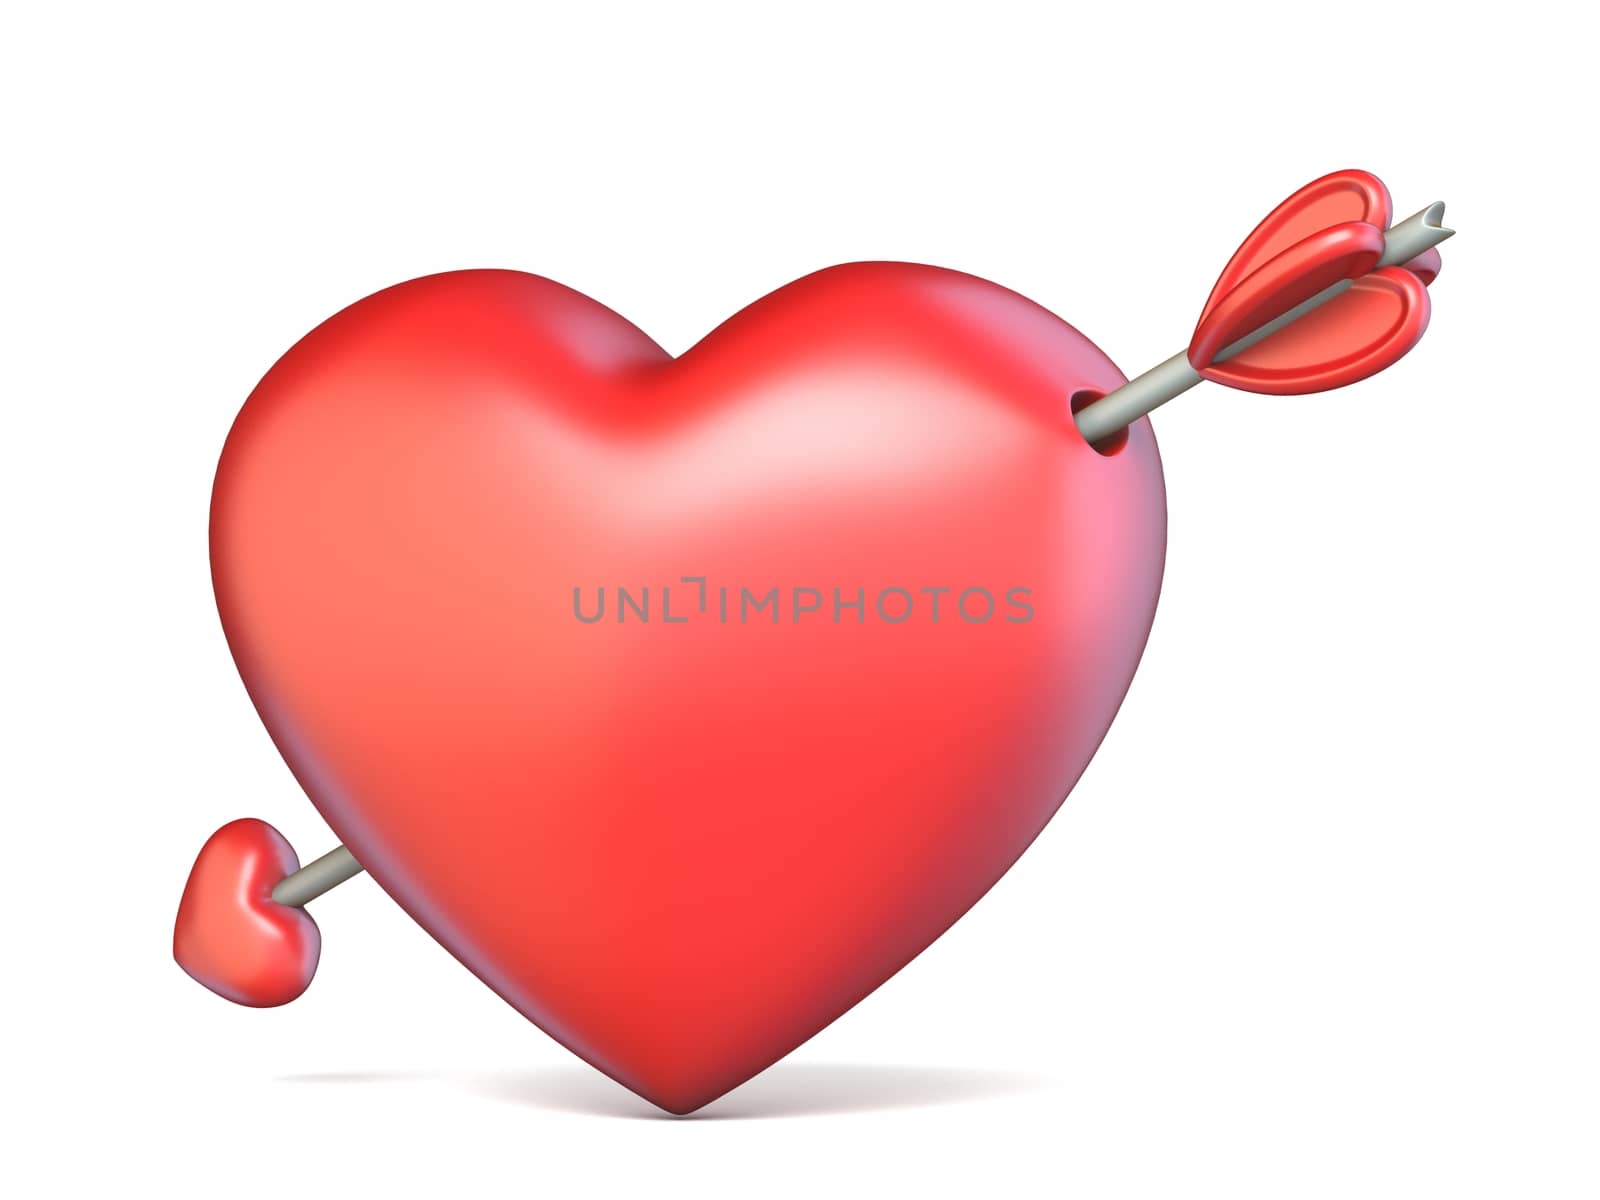 Heart pierced by arrow Valentine's concept 3D render illustration isolated on white background